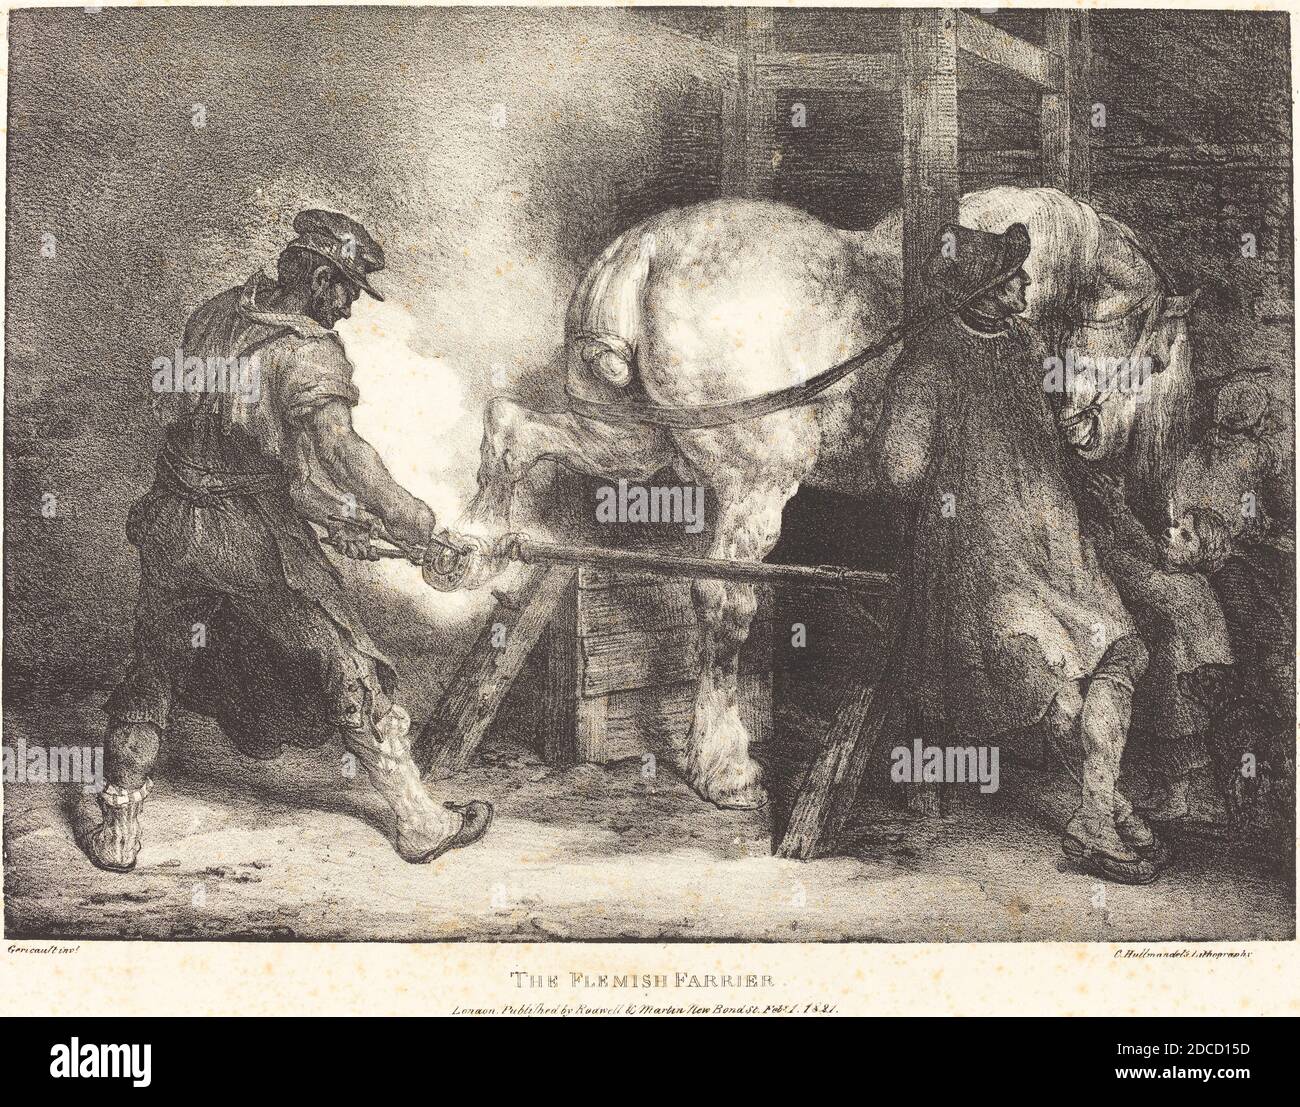 Théodore Gericault, (artist), French, 1791 - 1824, The Flemish Farrier, Various Subjects, drawn from life and on stone, (series), 1821, lithograph, image: 22.7 x 31.4 cm (8 15/16 x 12 3/8 in.), sheet: 38.5 x 55.1 cm (15 3/16 x 21 11/16 in Stock Photo